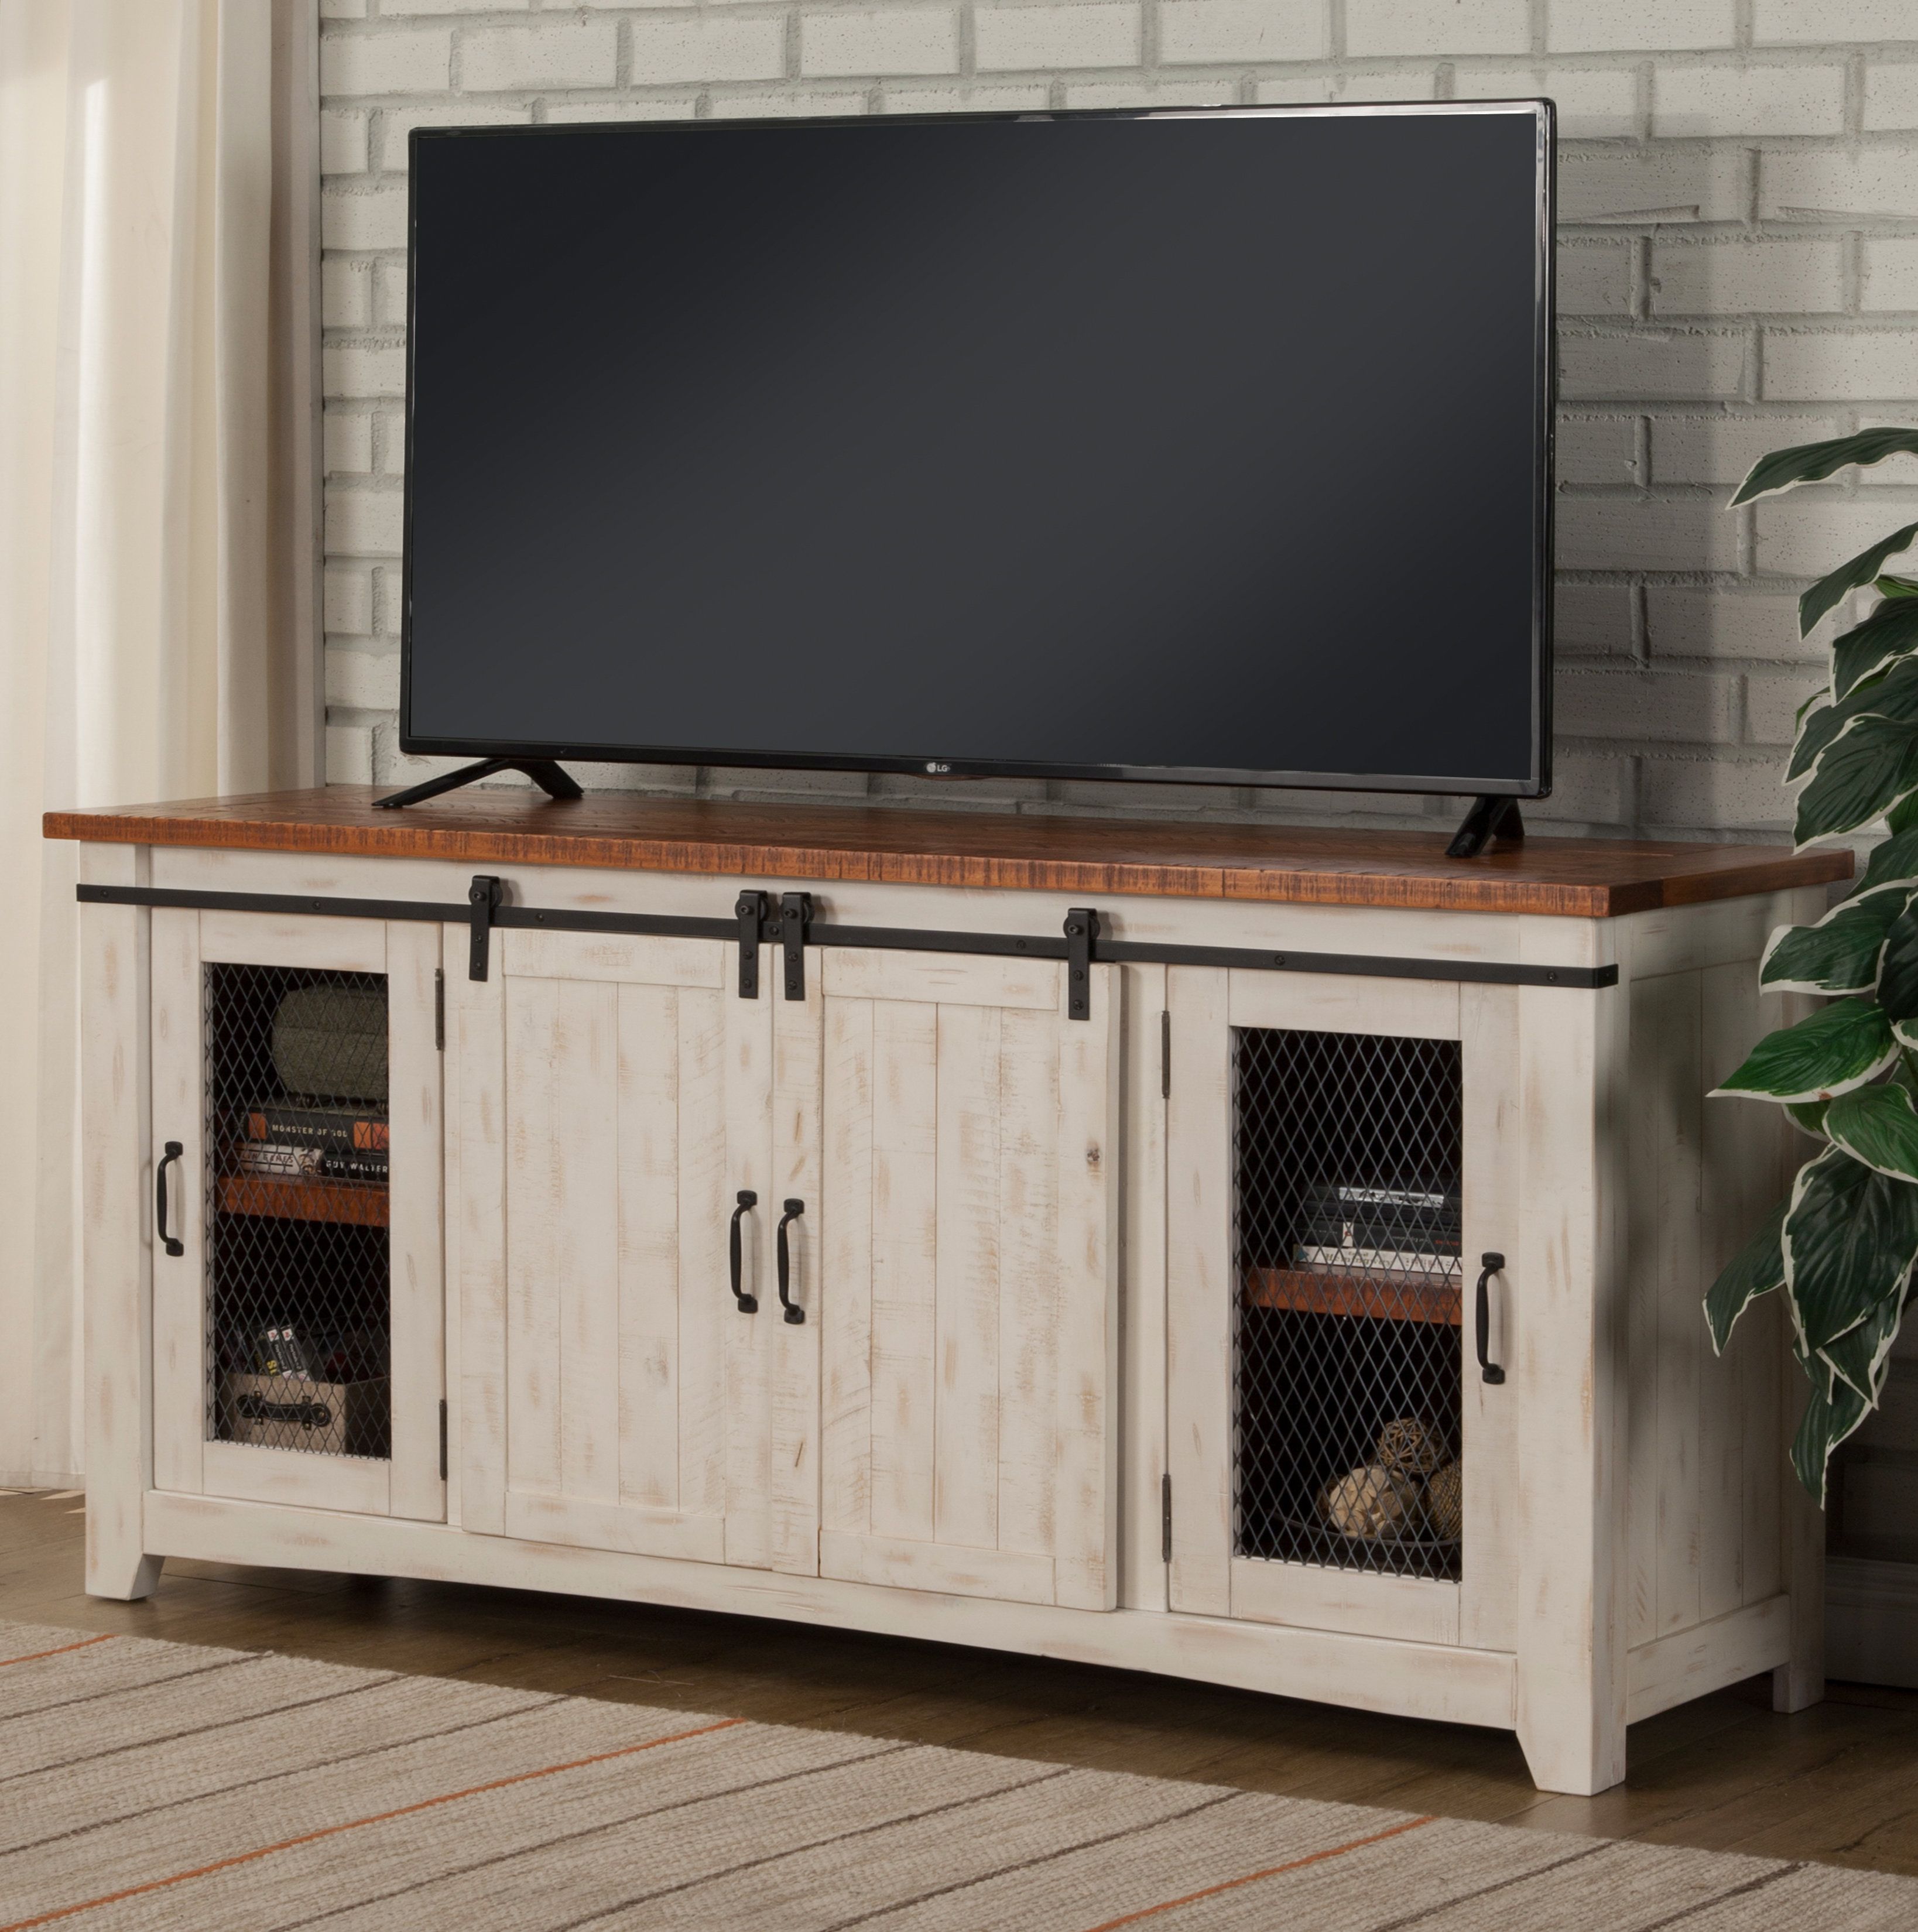 80 Inch Tv Stand | Wayfair Inside Laurent 70 Inch Tv Stands (View 13 of 30)